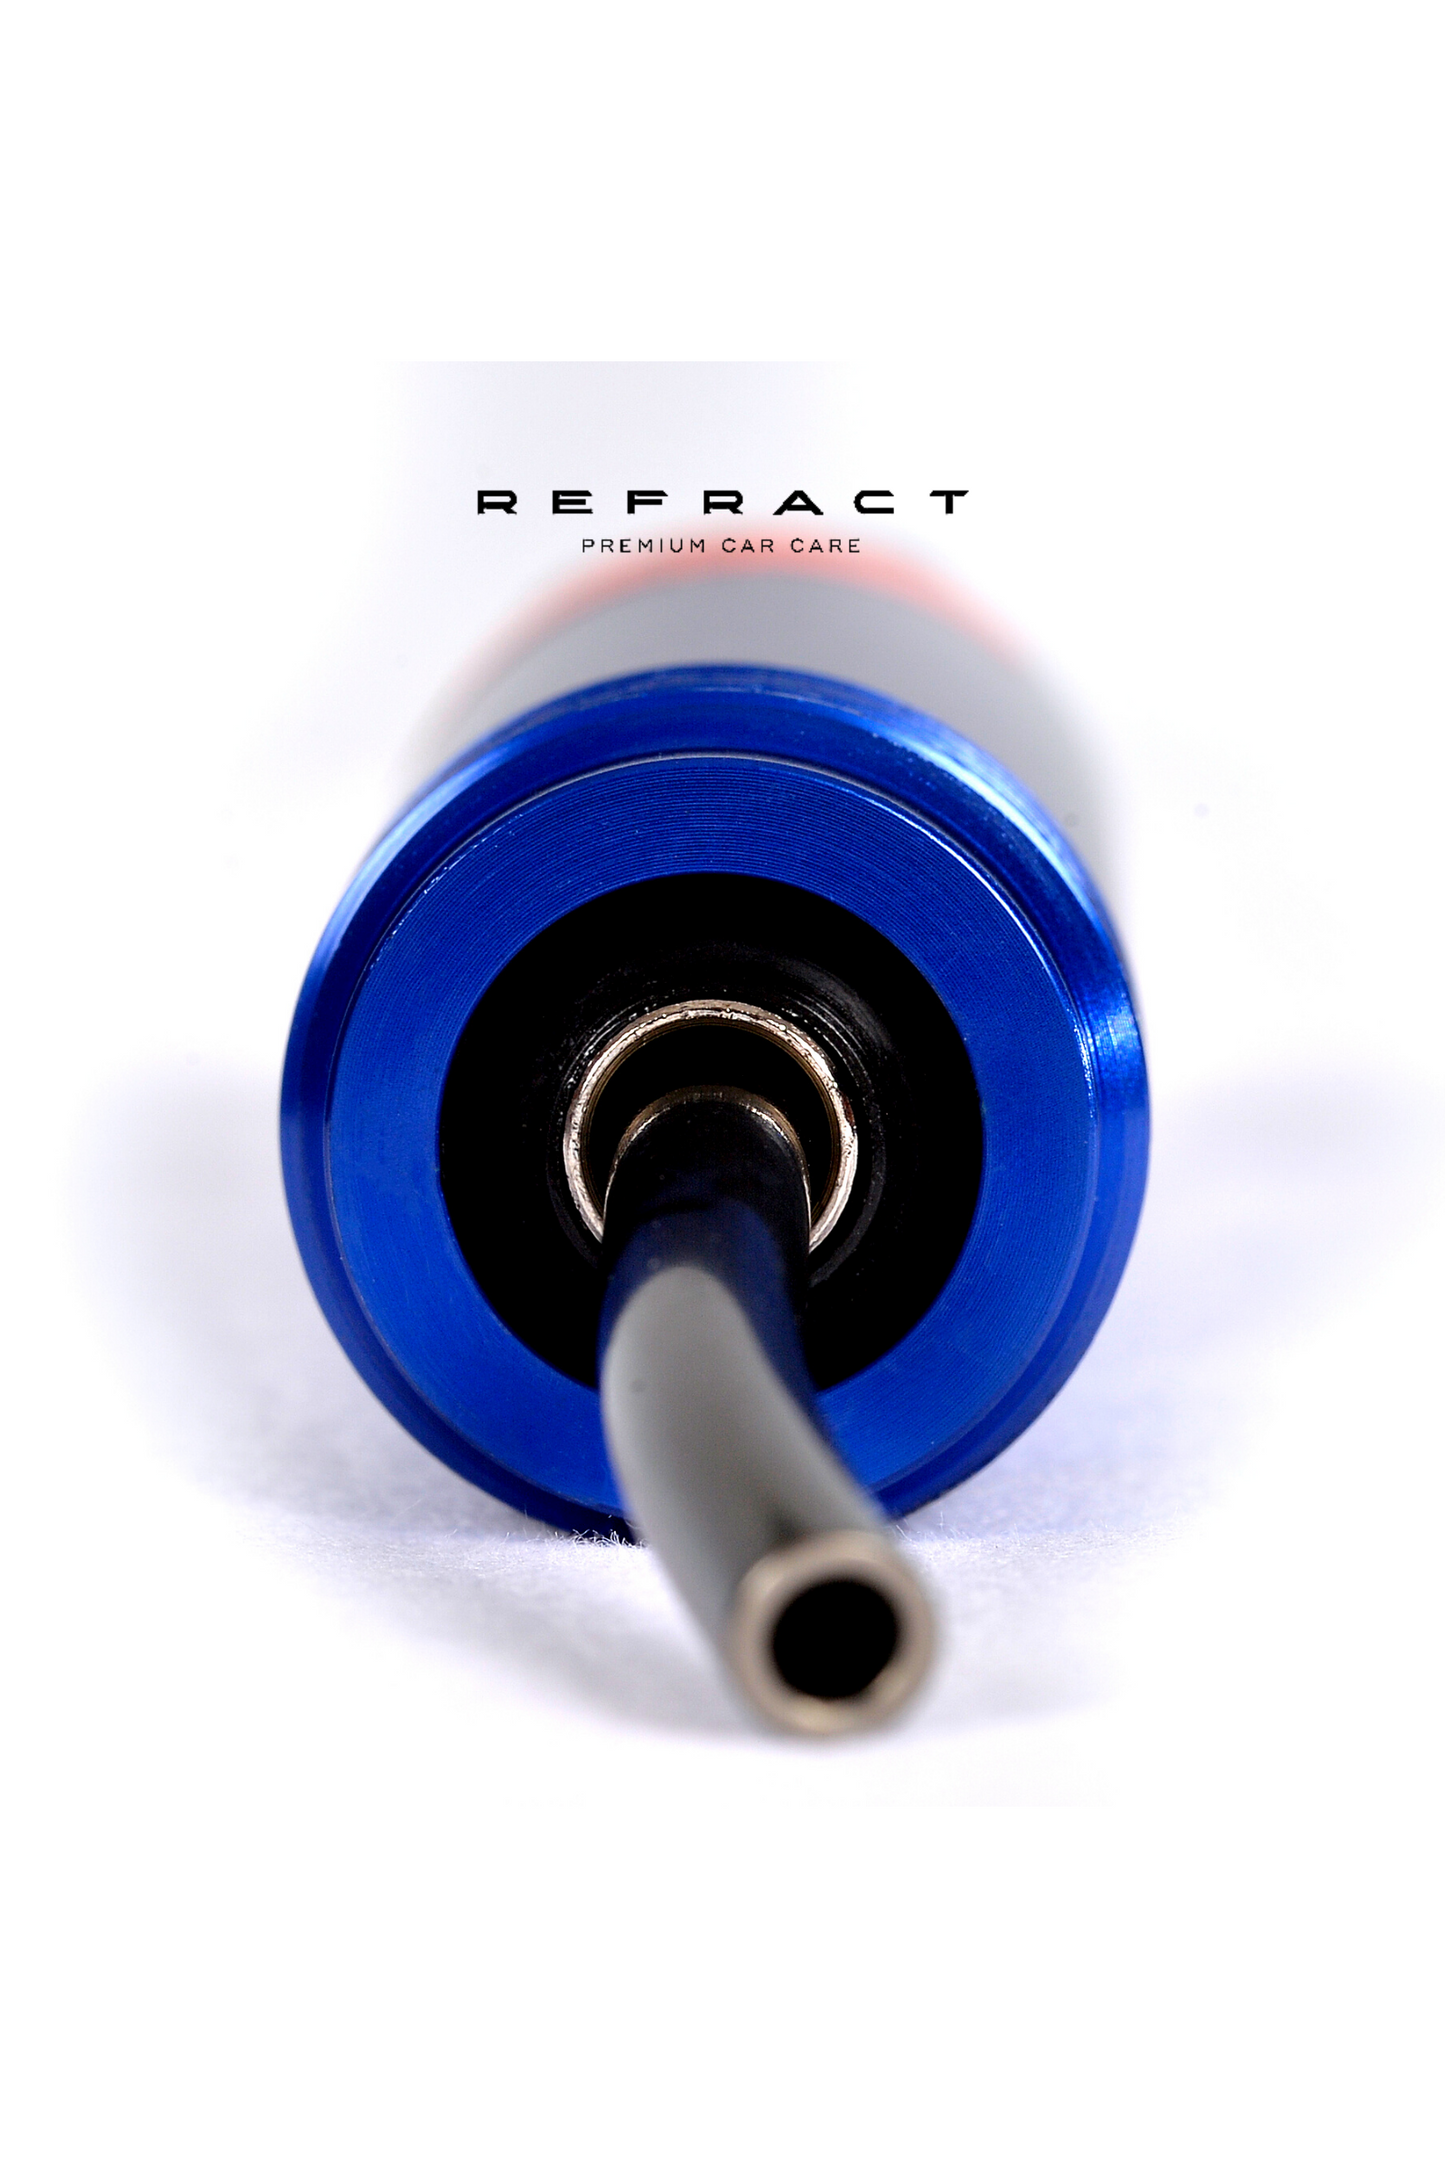 Refract Premium Car Care Products REFRACT FURY and Storm Cleaning Gun Tornador $299.95